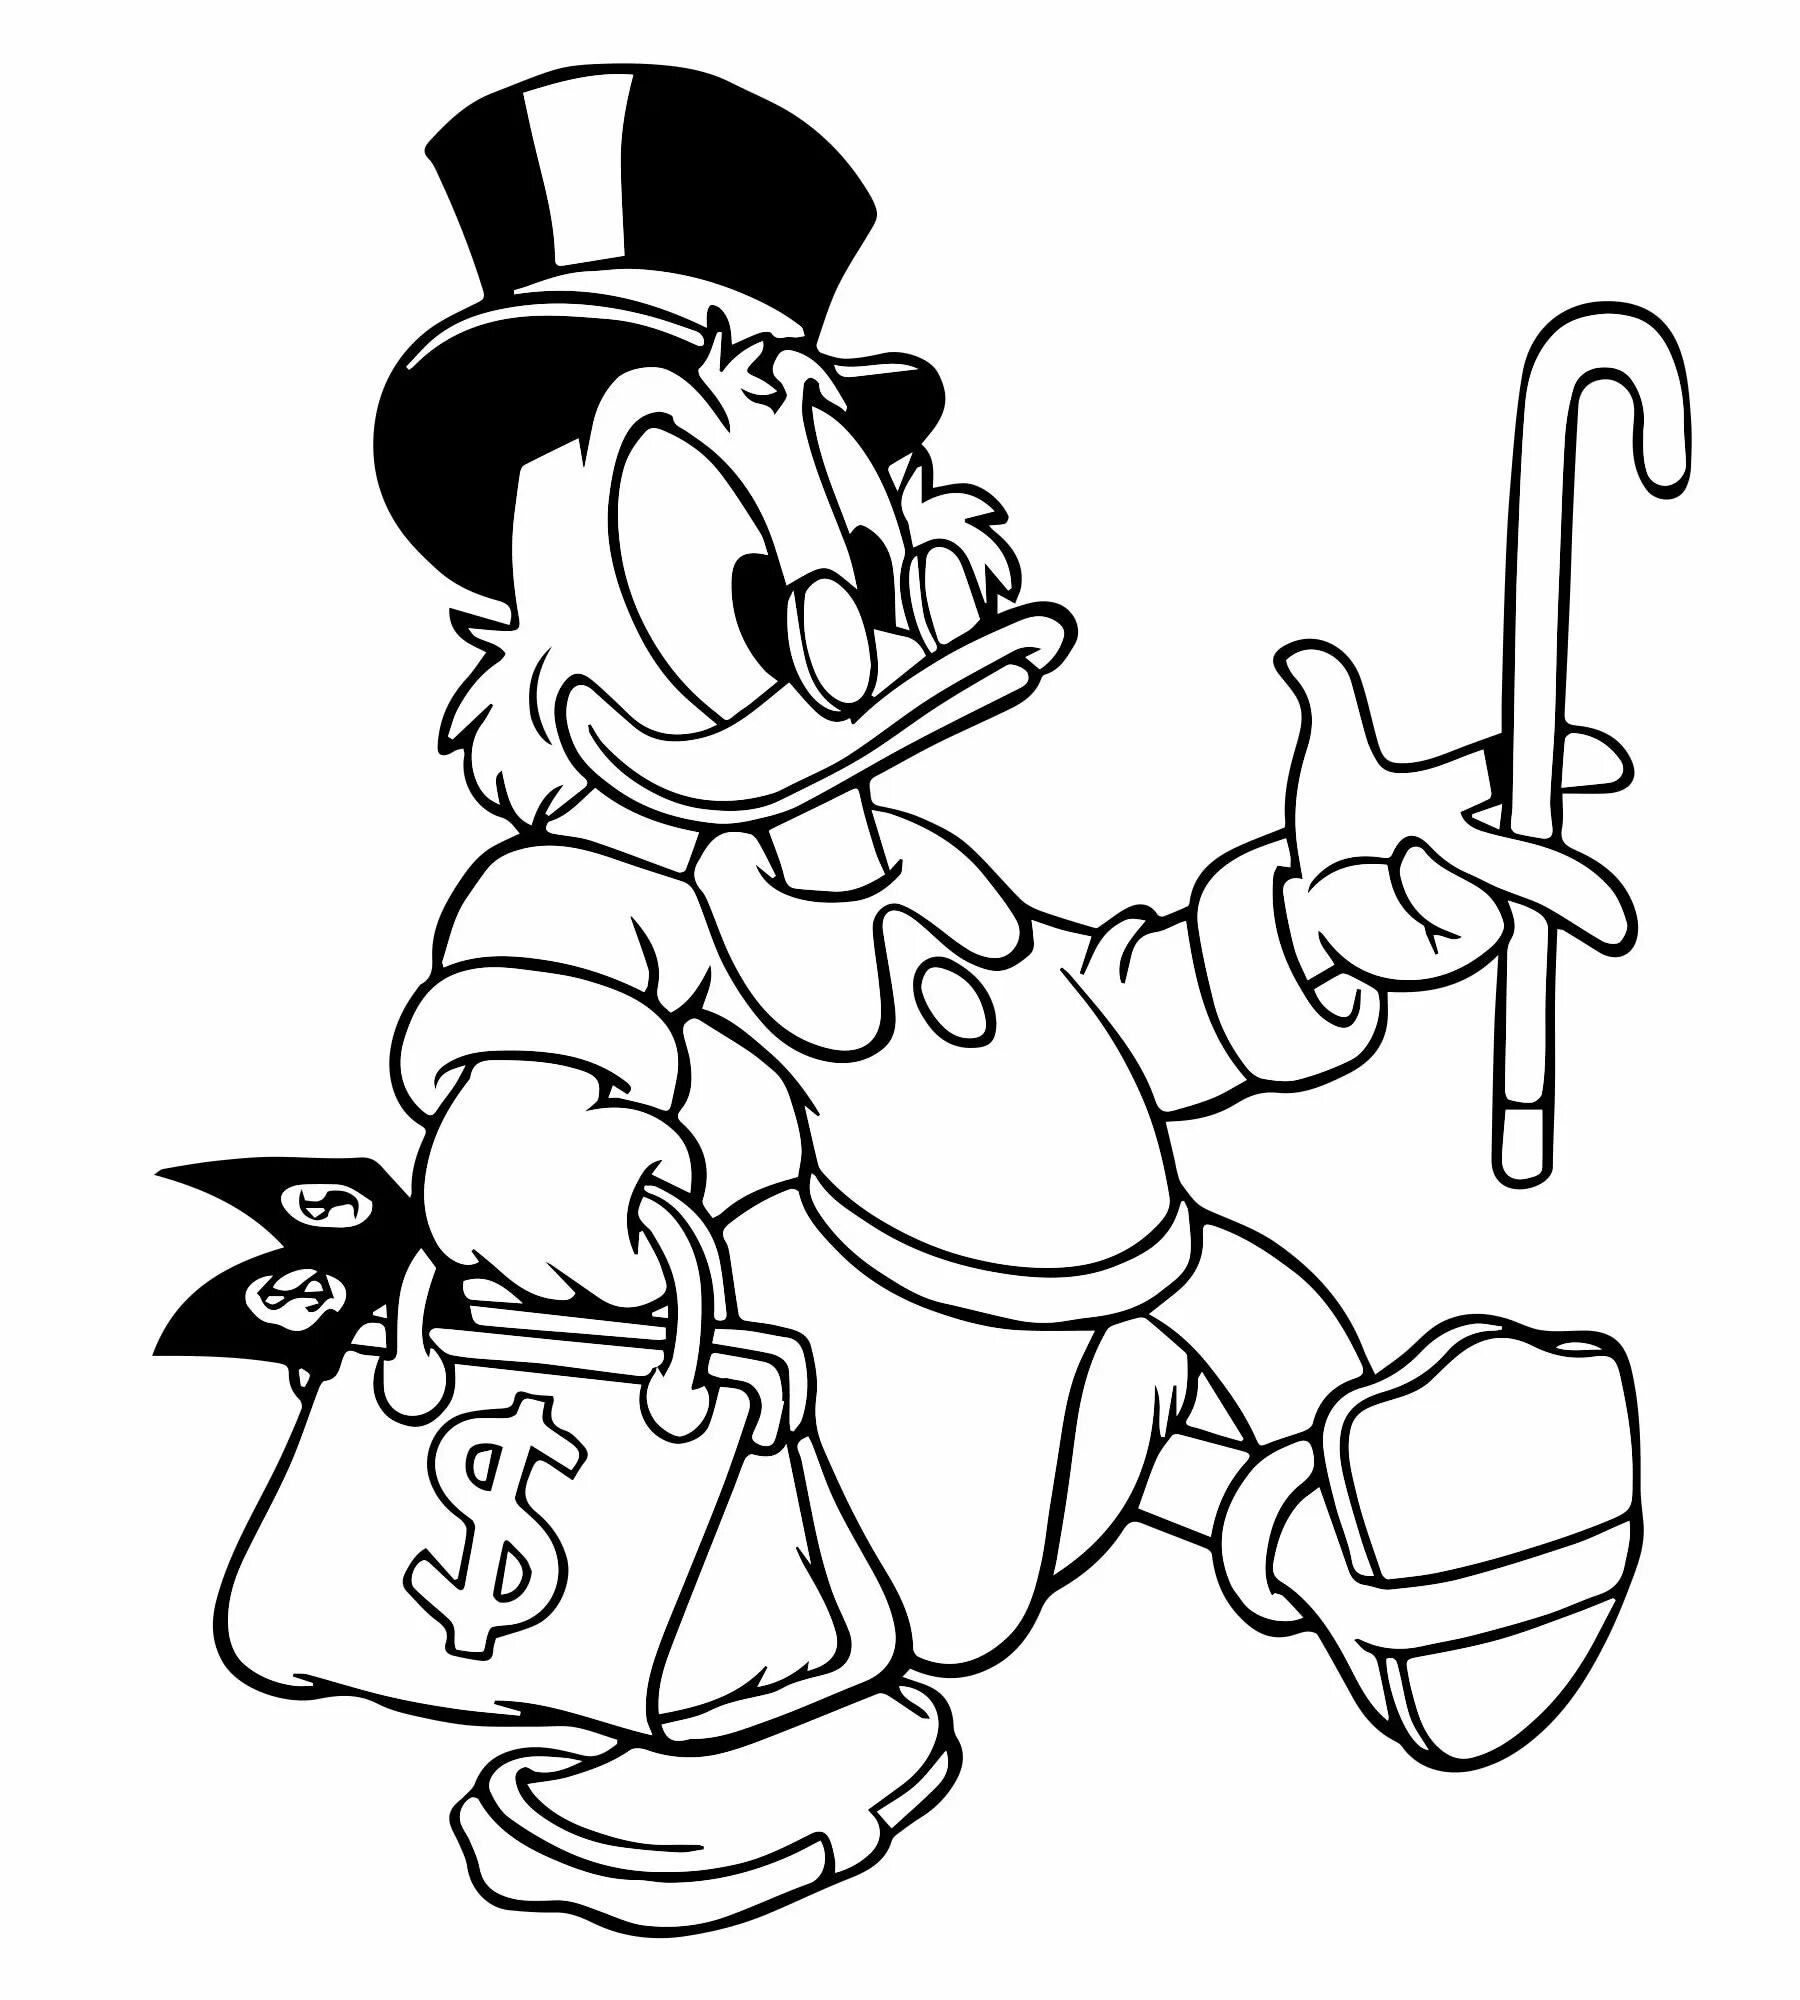 Scrooge mcduck with money #2